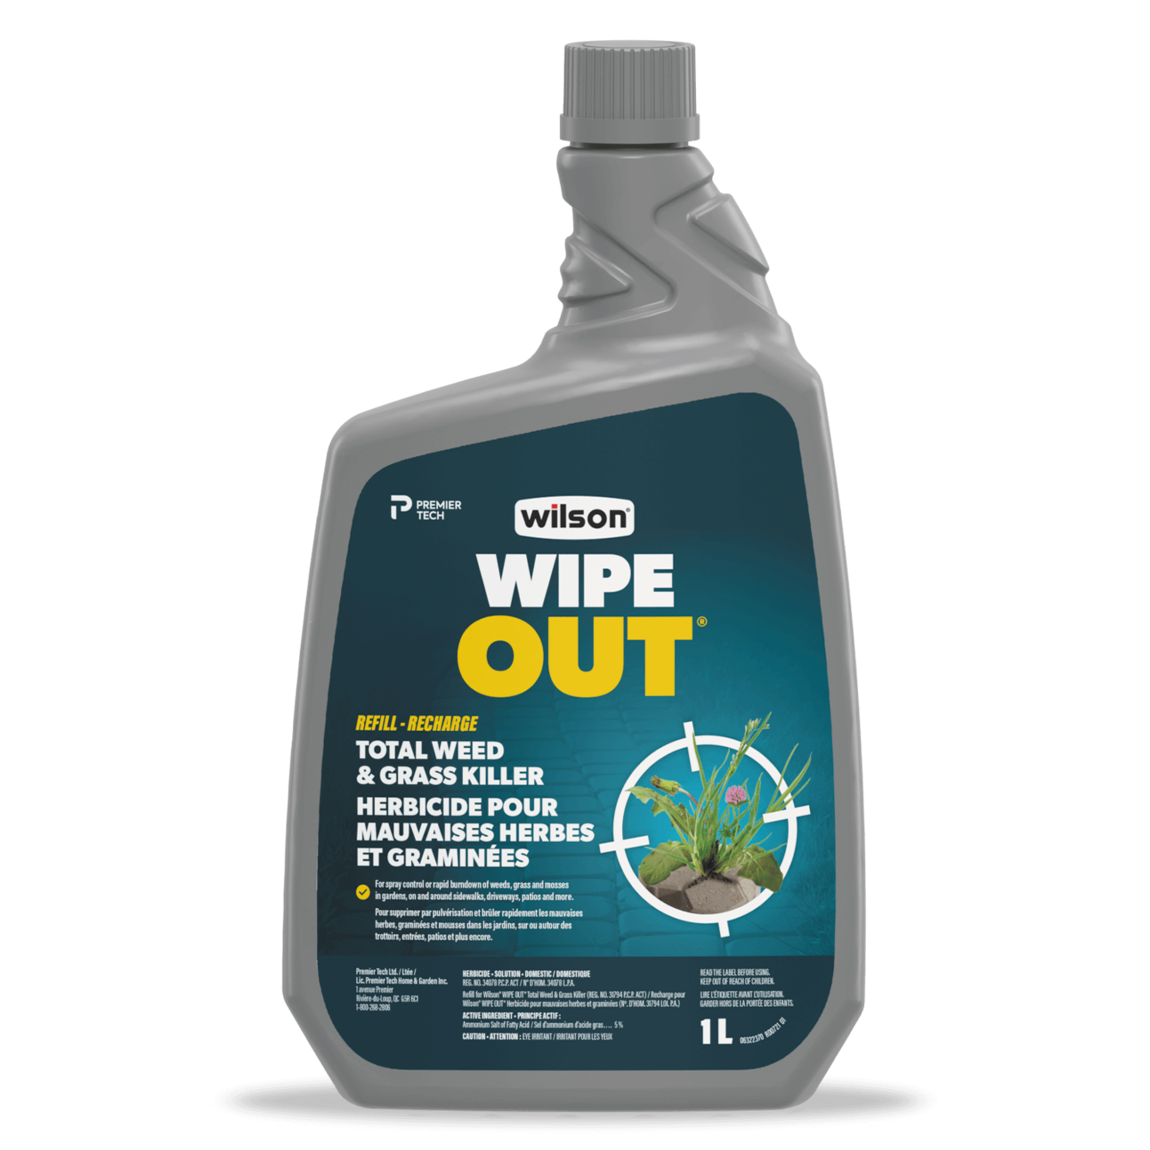 Wilson WIPE OUT Total Weed & Grass Killer Refill